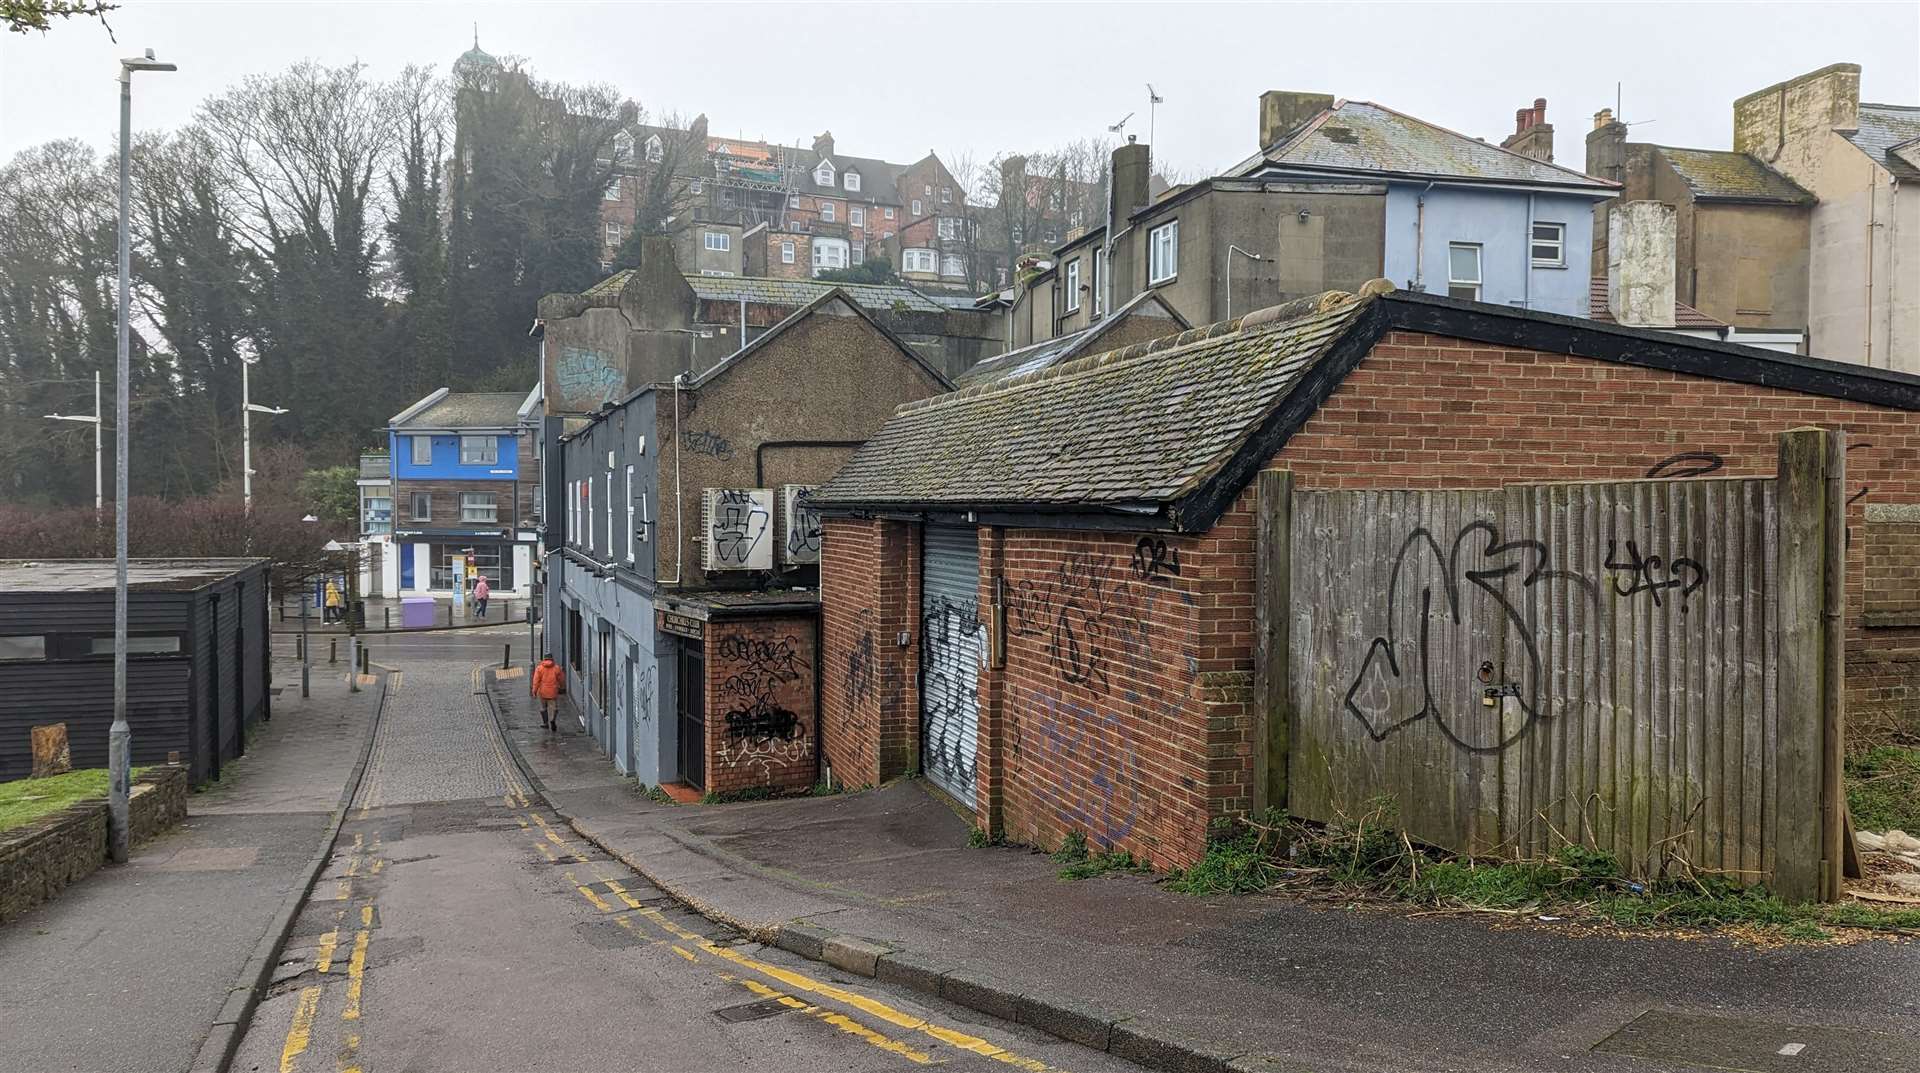 Graffiti is a common sight all over the Harbour ward in Folkestone